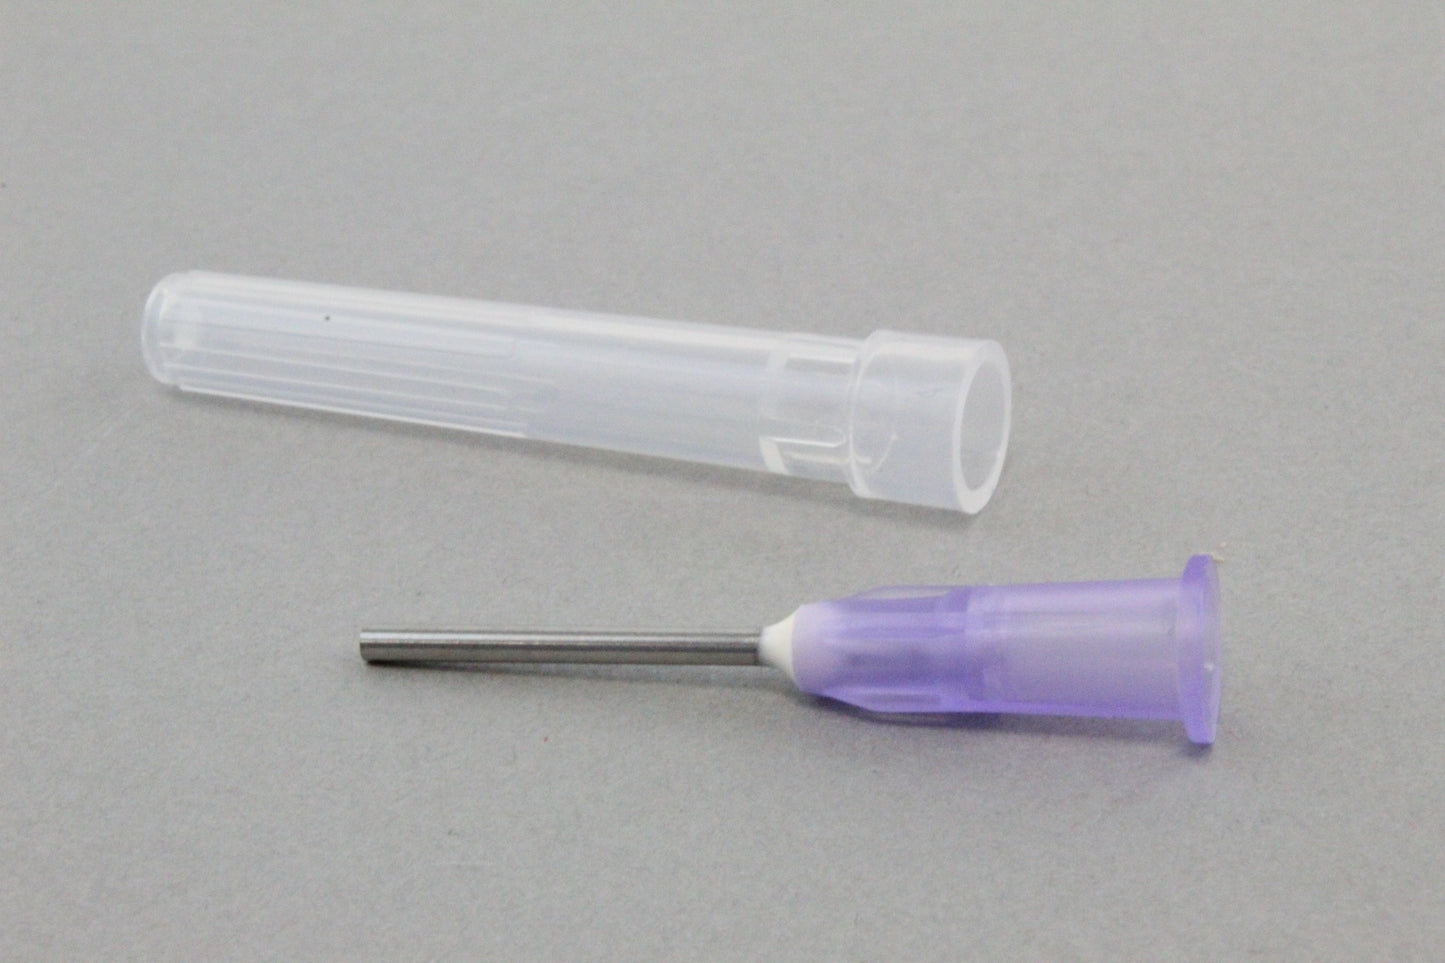 Blunted Dispensing Needle for gels